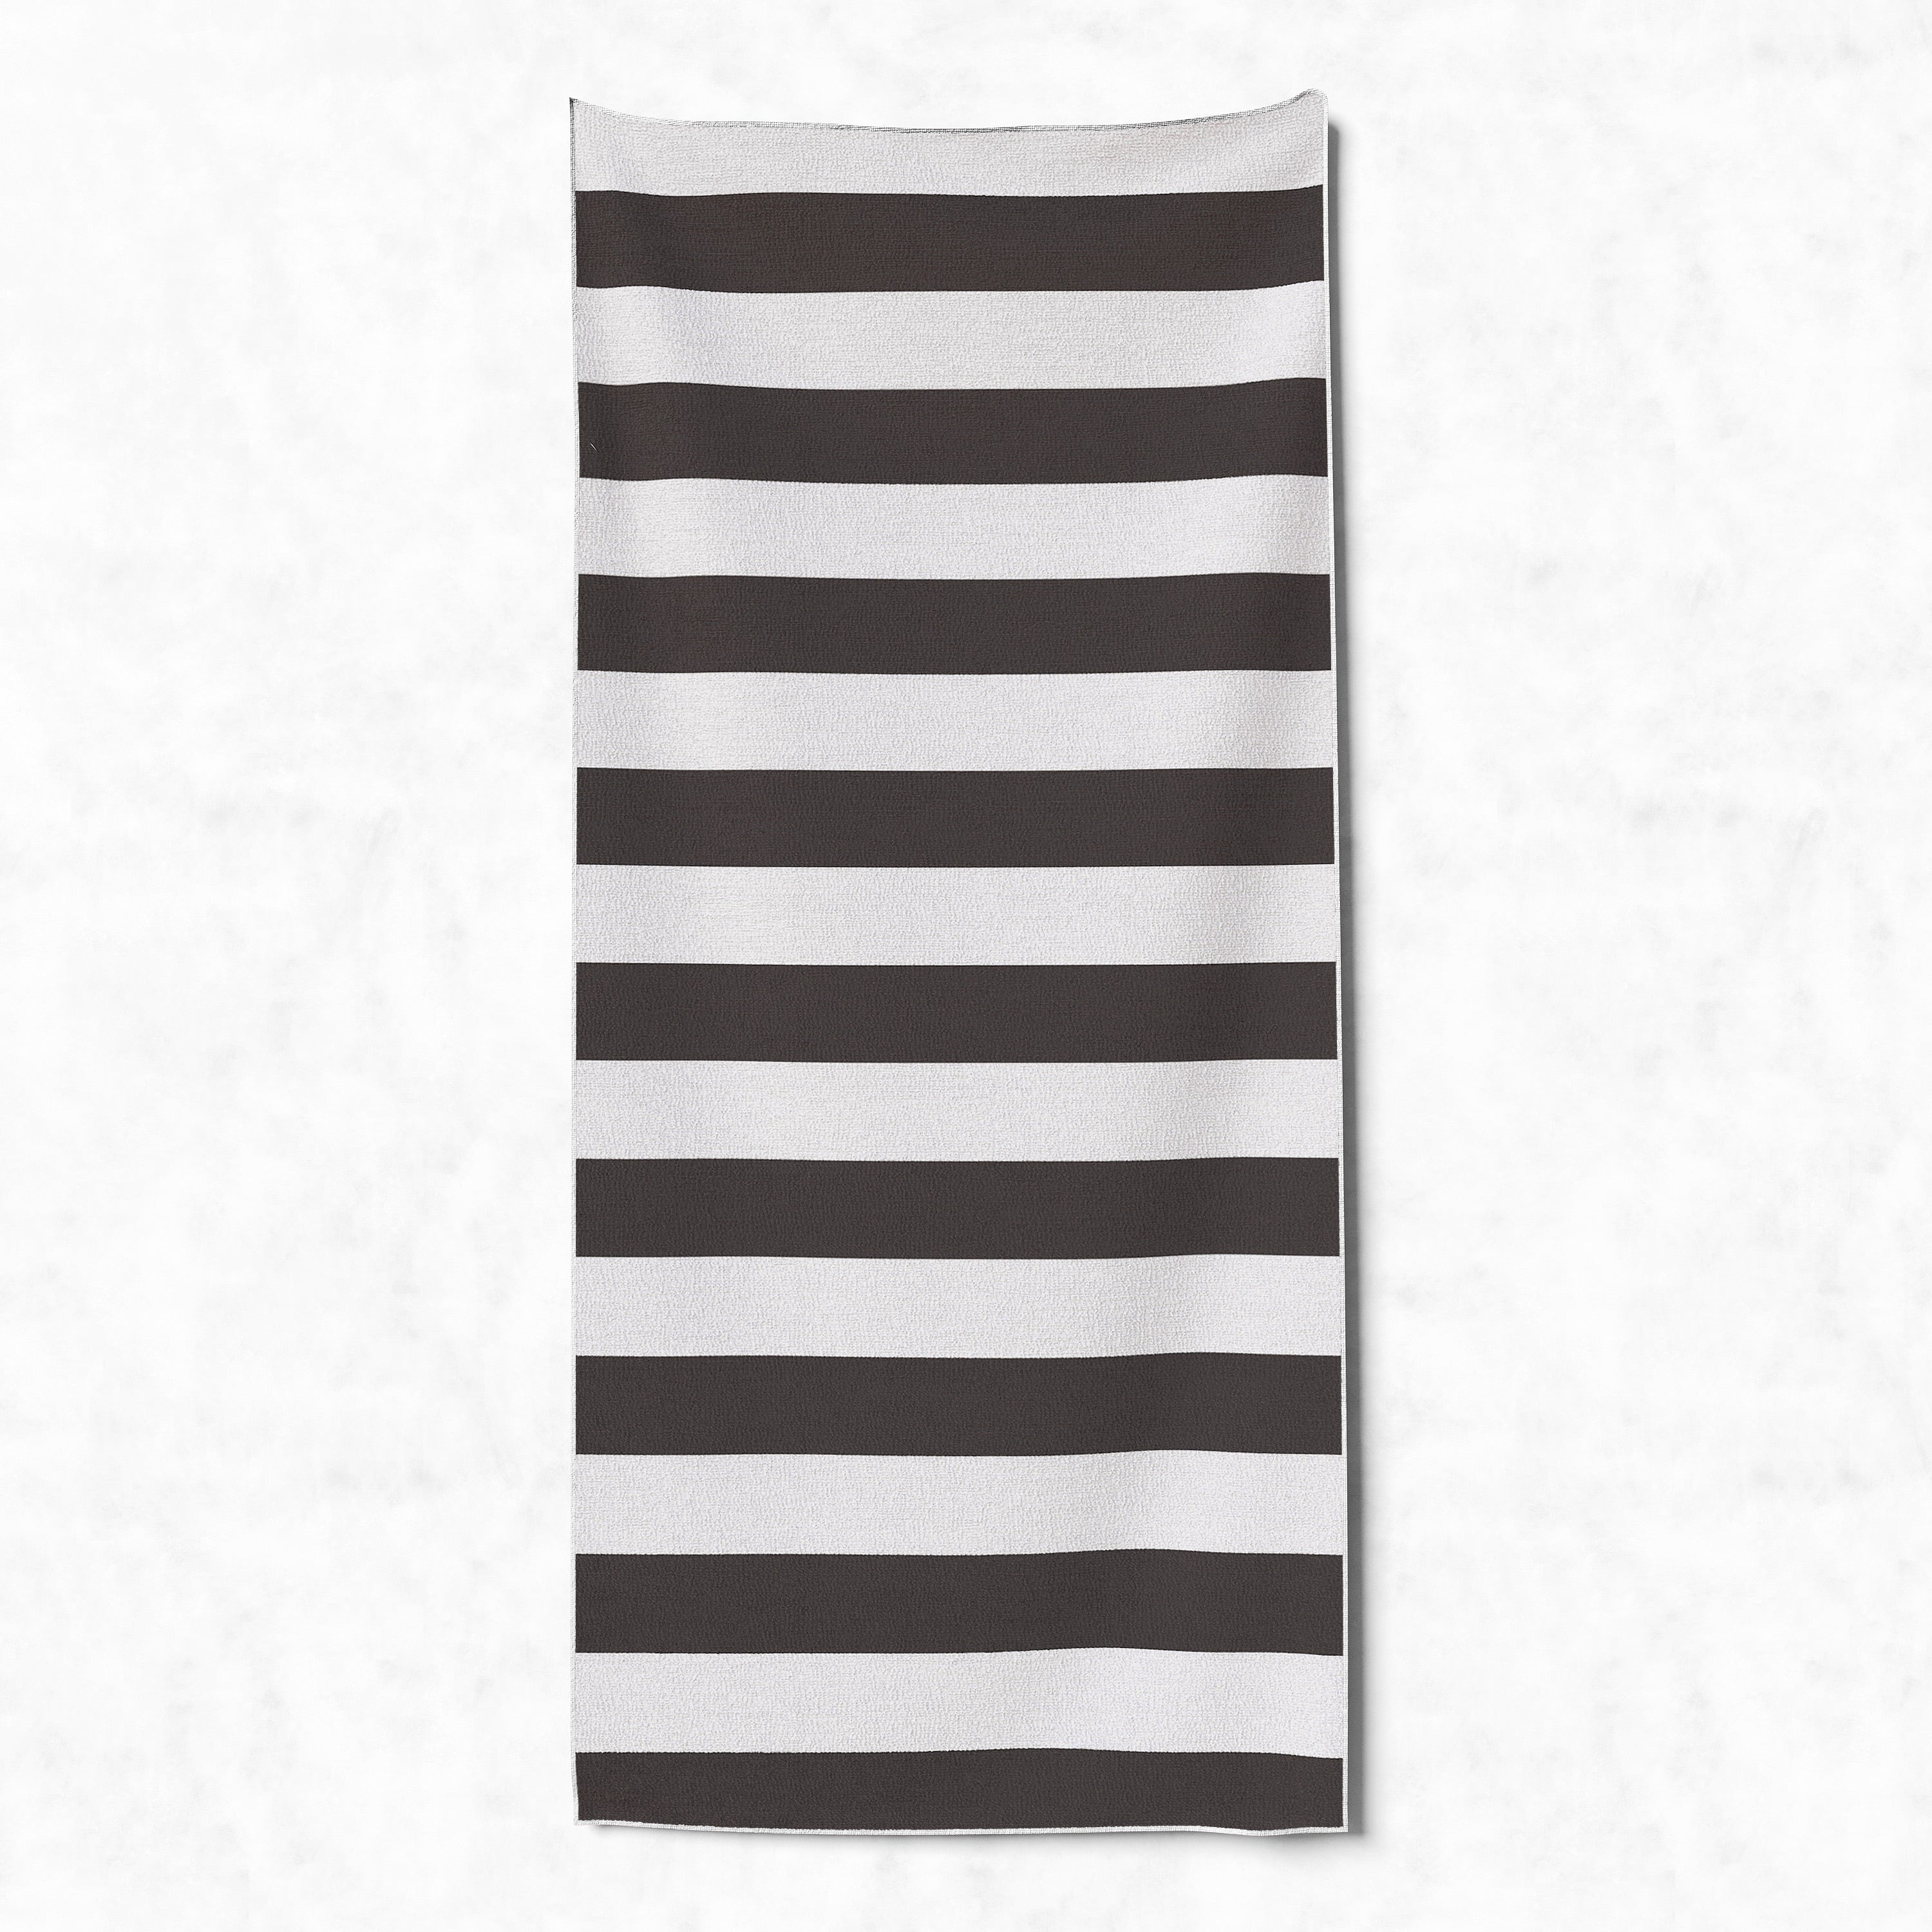 Black and white stripe_Capri_Ultimate_Relaxation_Beach_Towel_With_Pocket.